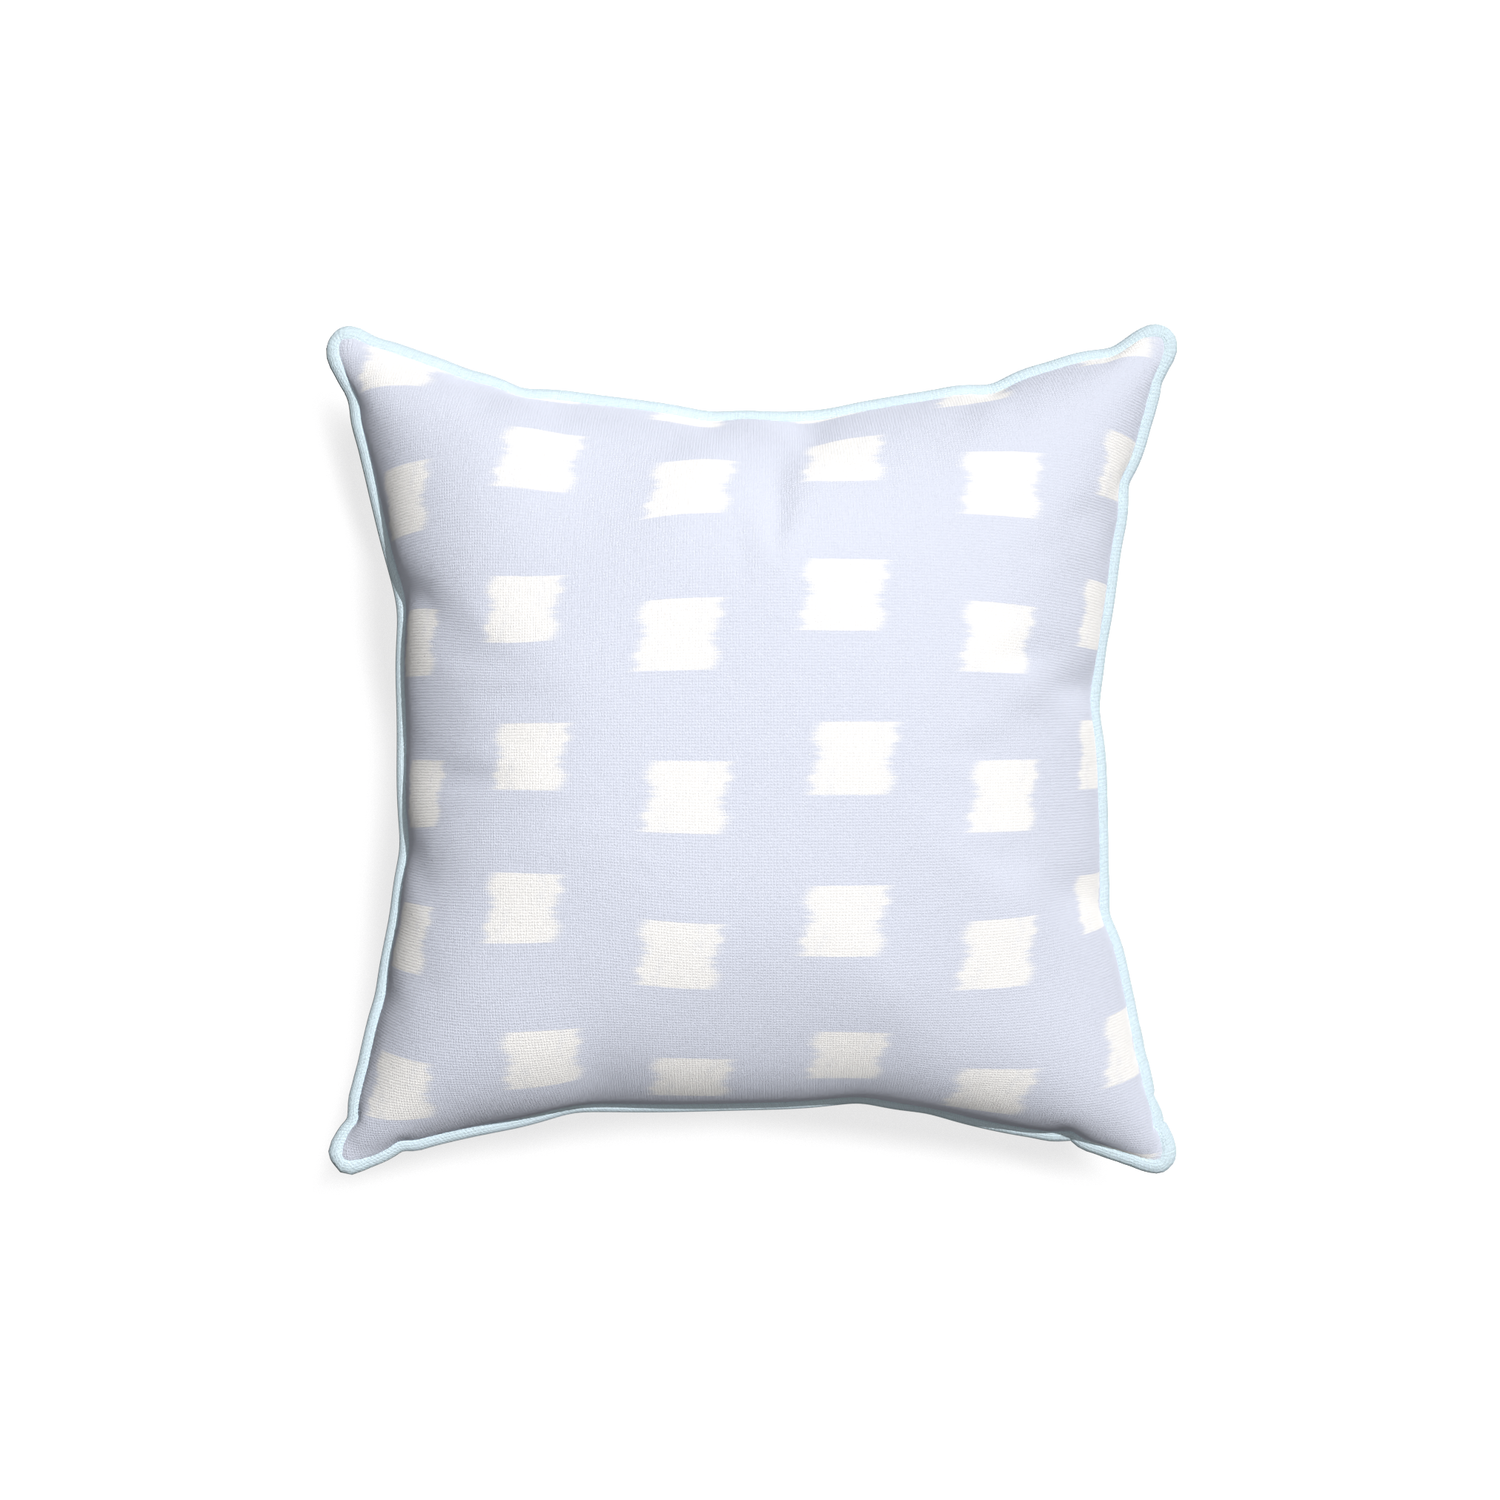 18-square denton custom sky blue patternpillow with powder piping on white background